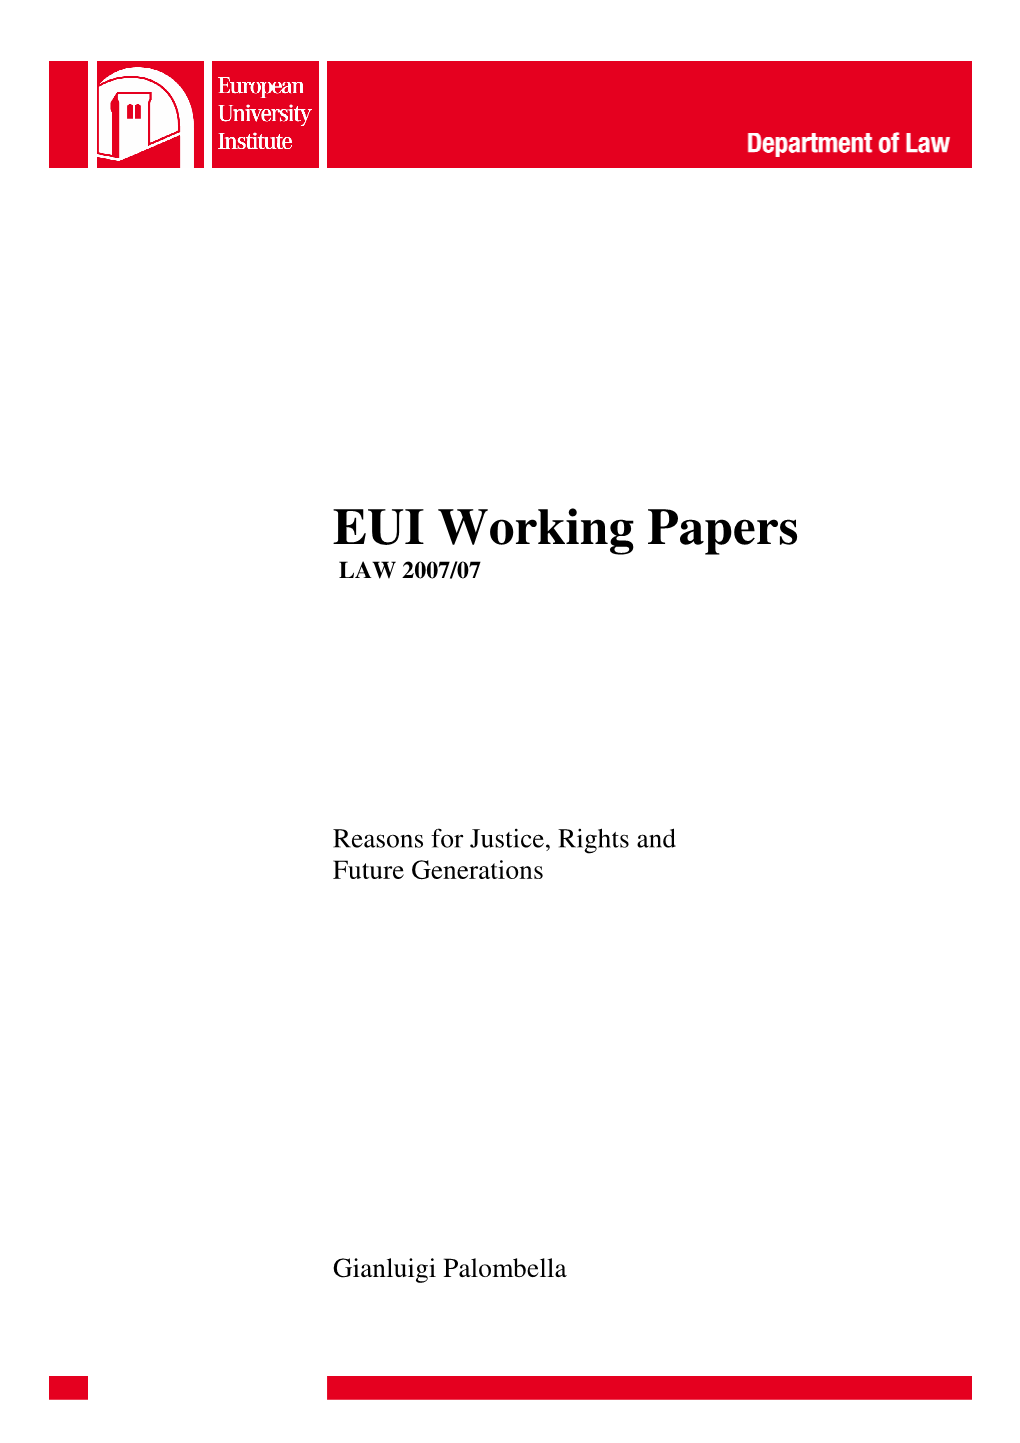 EUI Working Papers LAW 2007/07